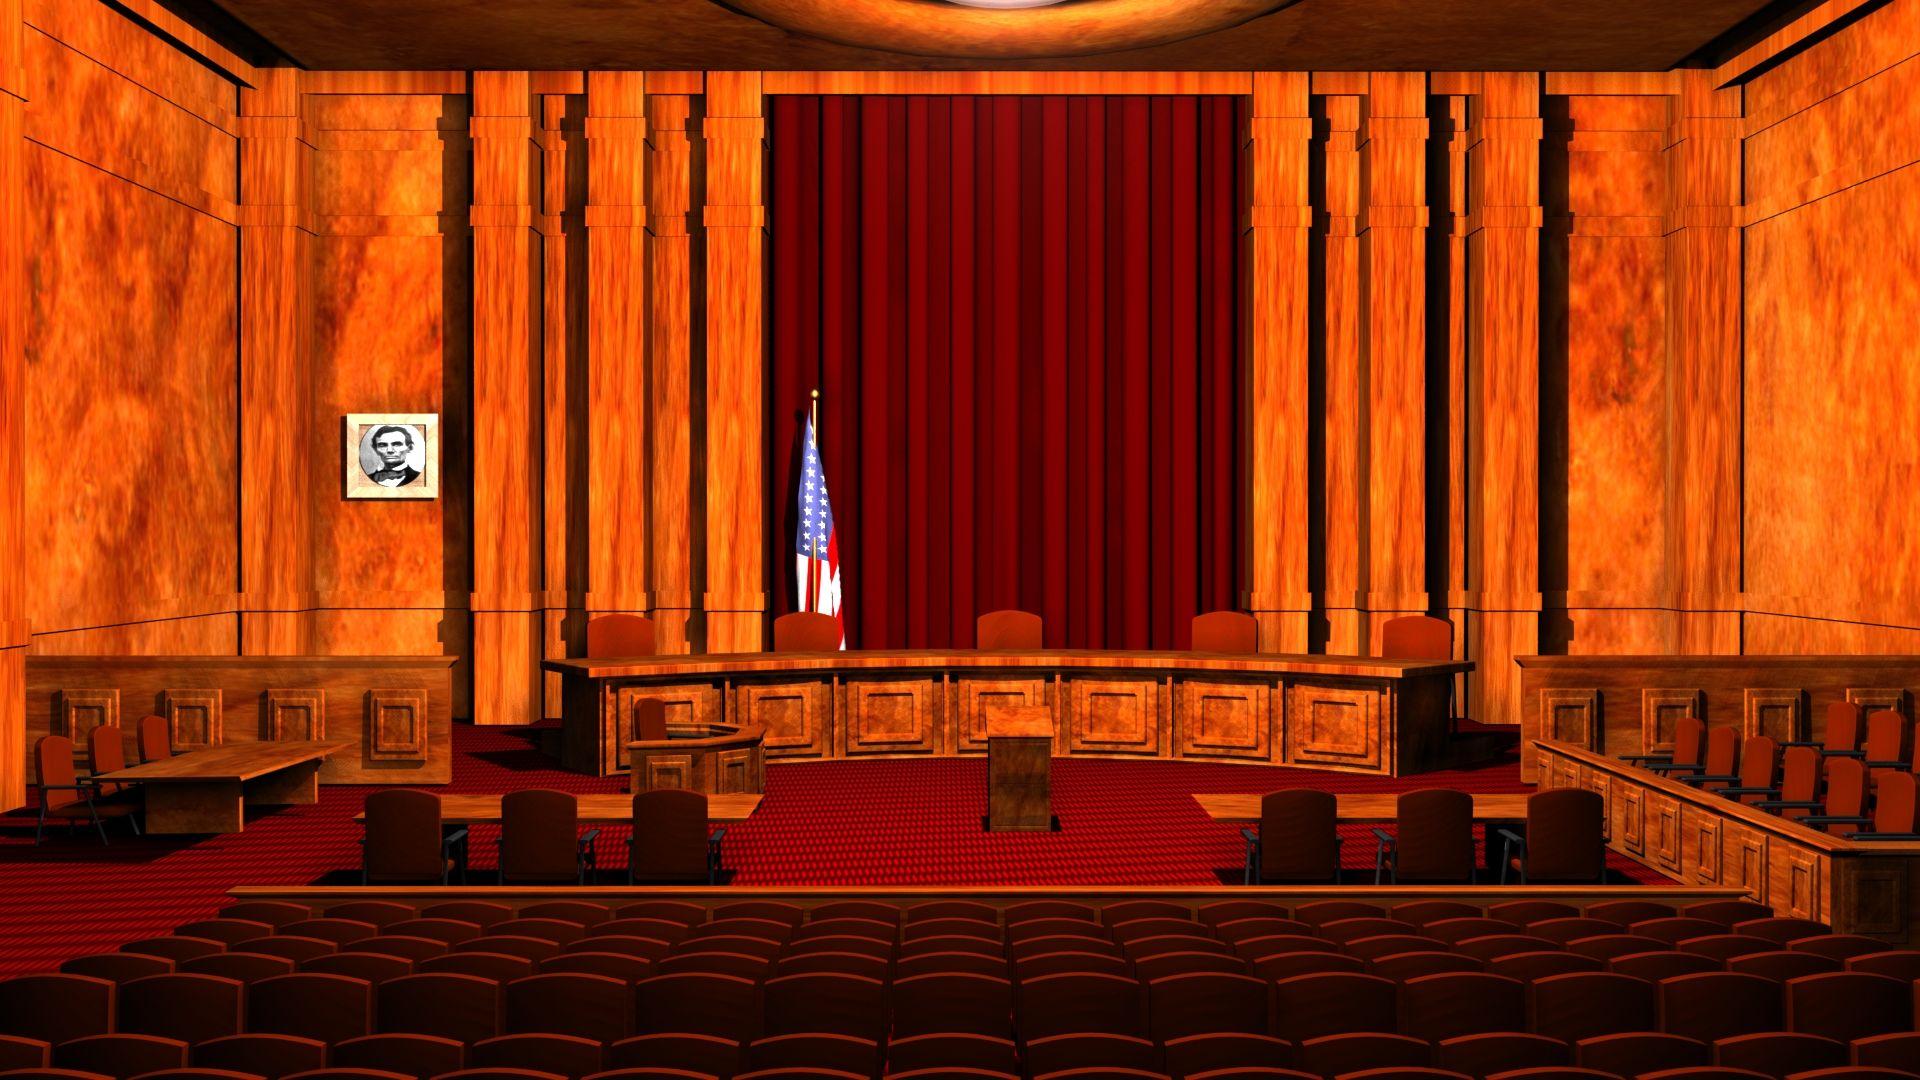 Free Zoom Background Courtroom